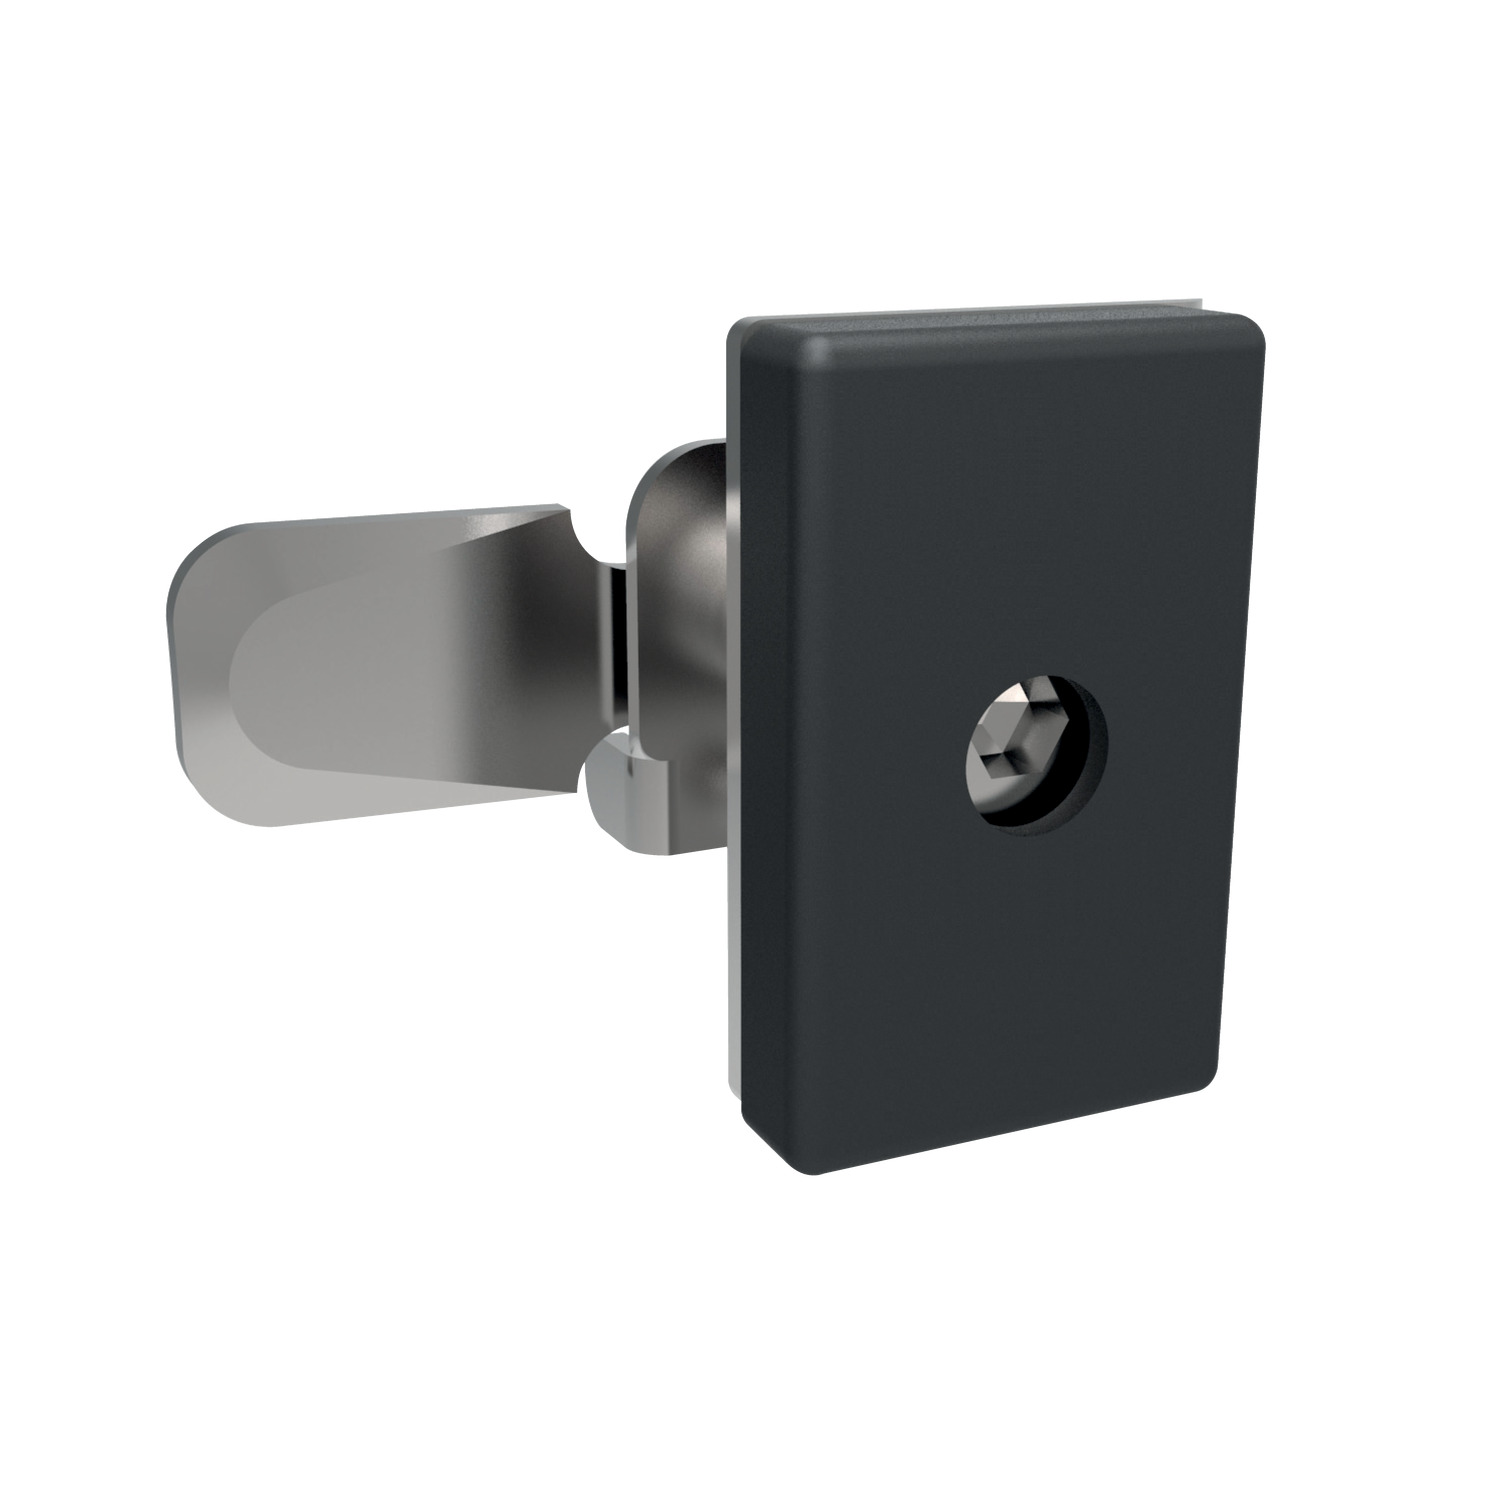 A1561.AW0224 Panel Latches - Left cover - hexagon driver